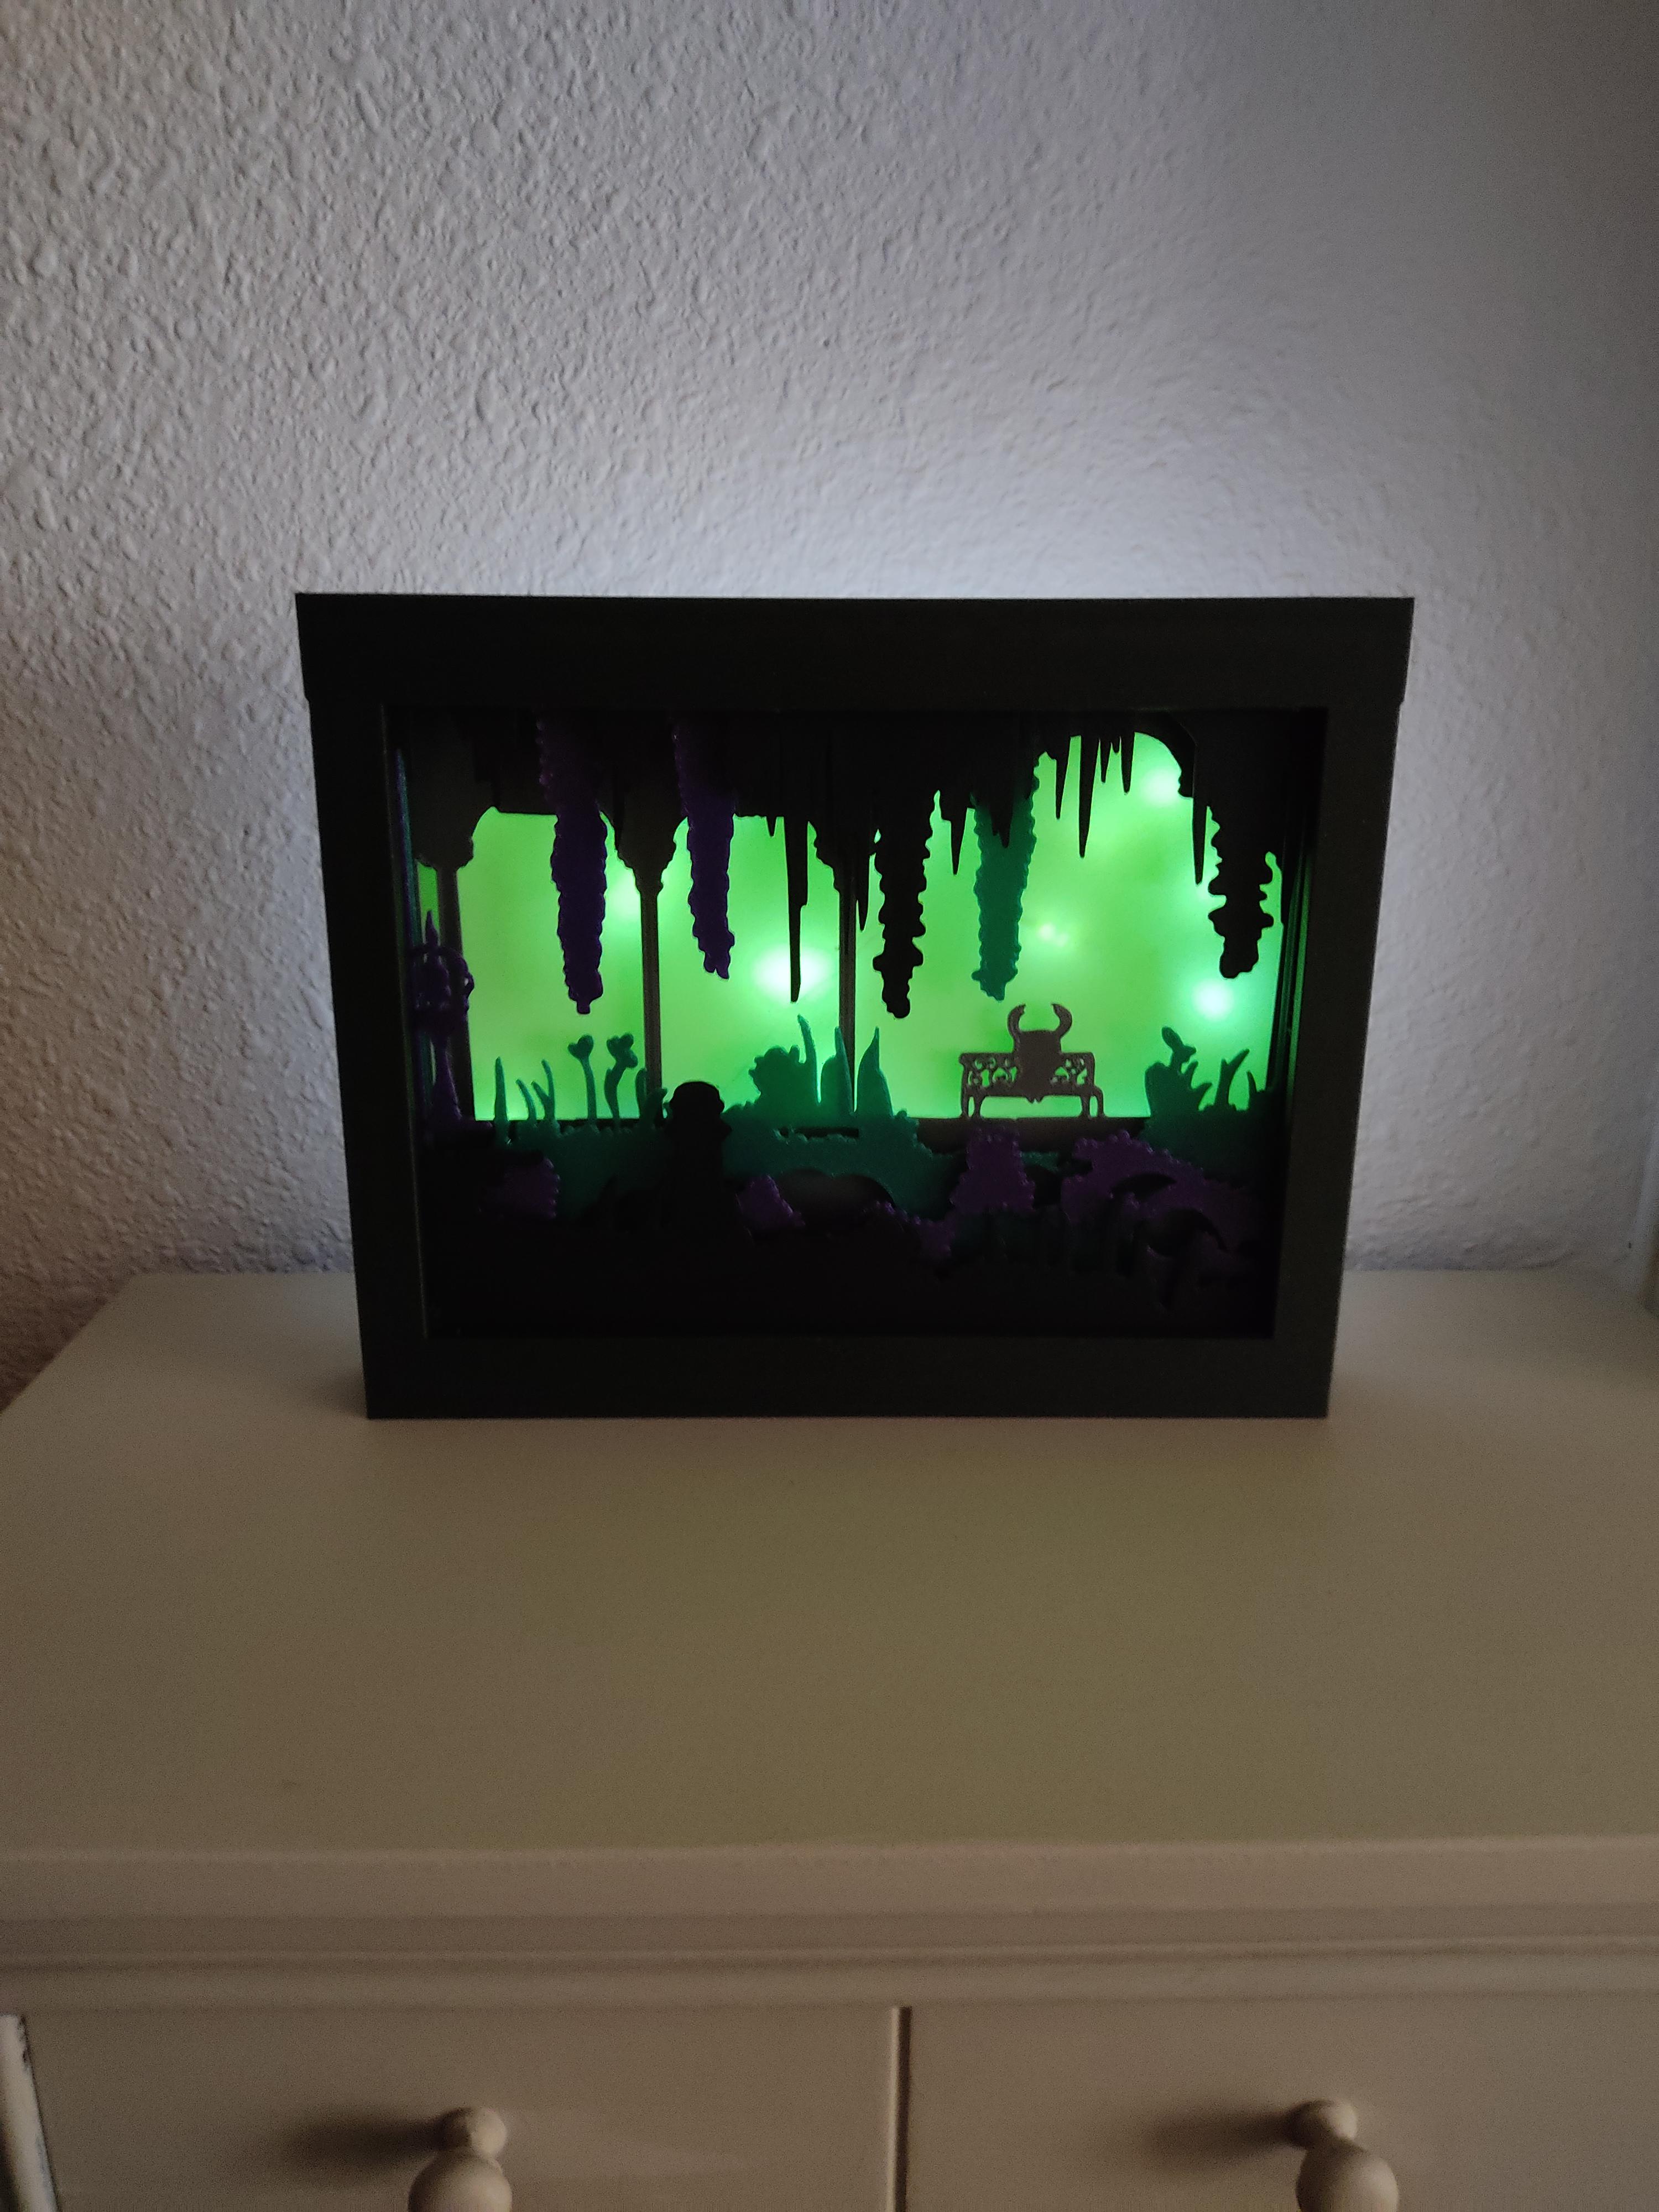 Hollow Knight plates for Light - Shadow Box 3d model